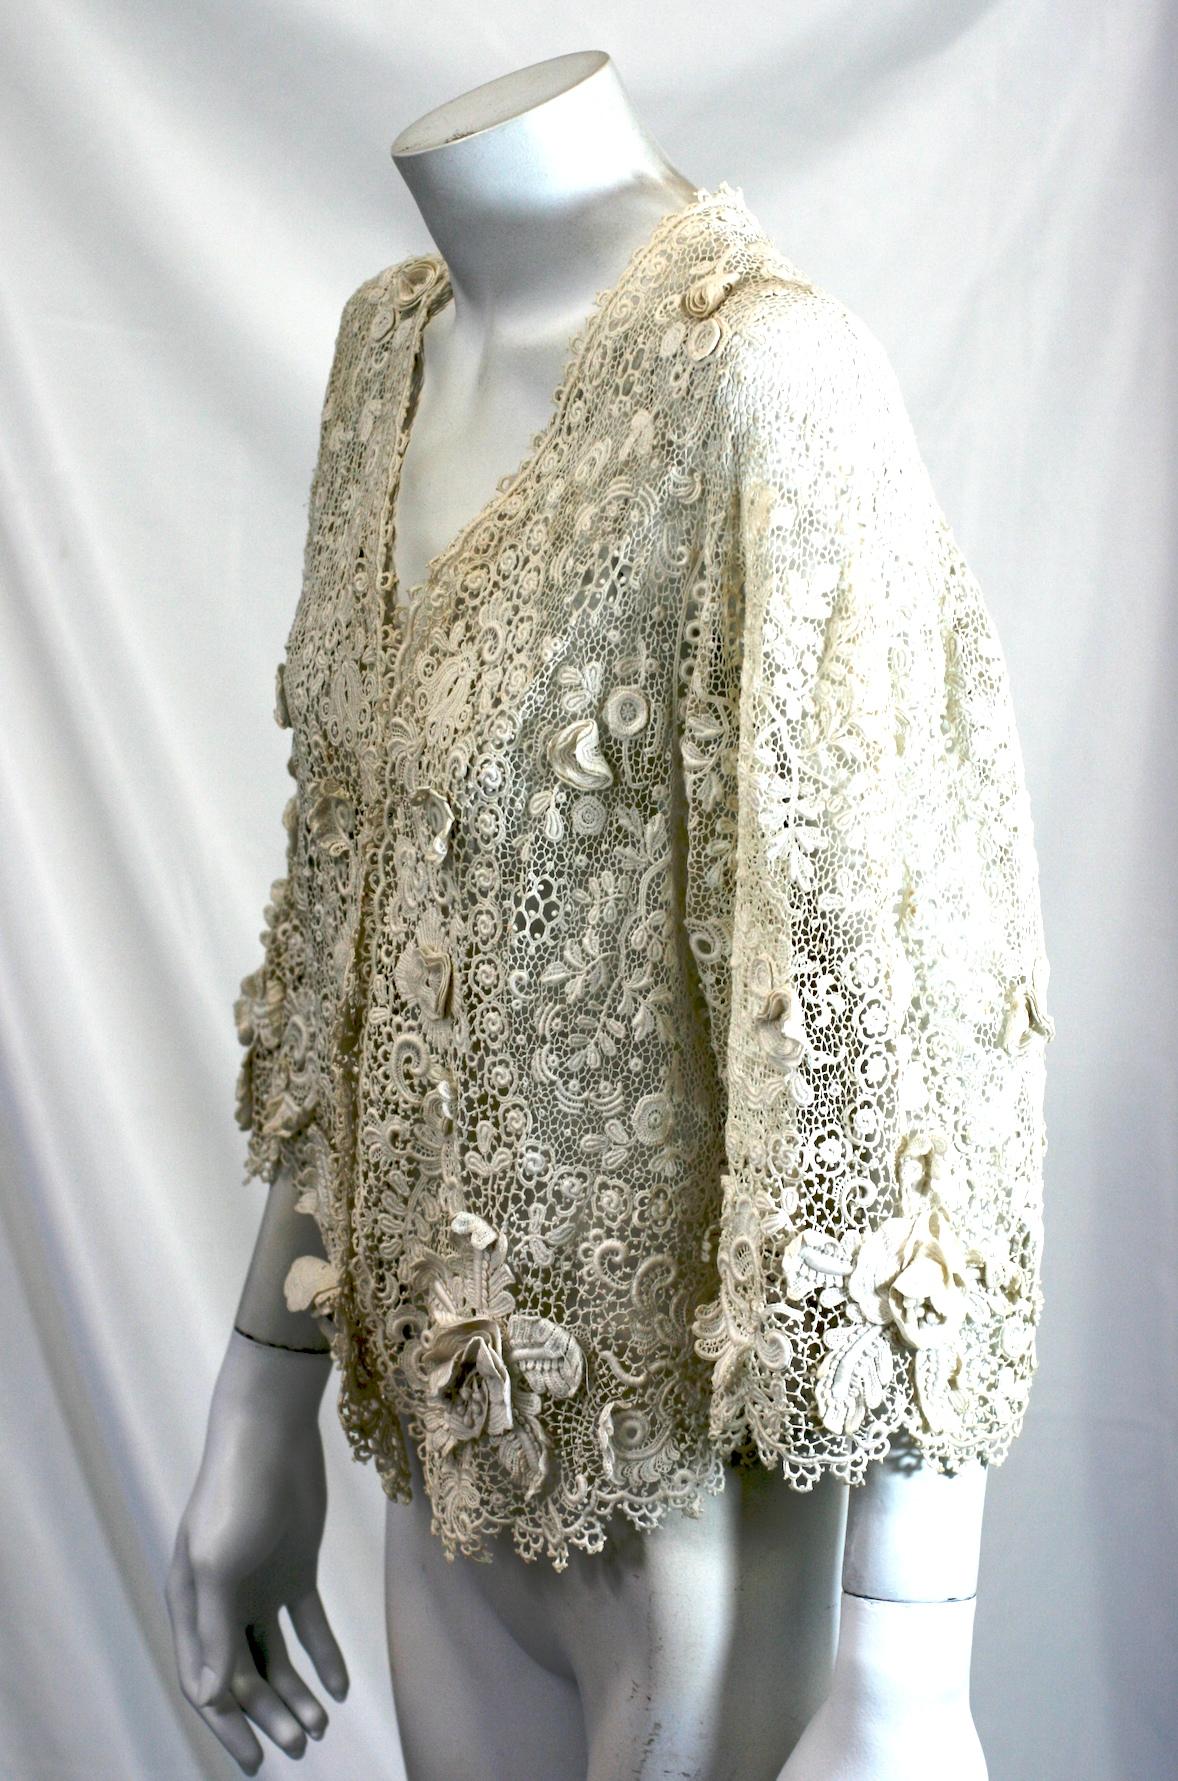 Wonderful Edwardian Crochet Lace Bolero Jacket with huge 3 dimensional florals throughout including large Orchid blooms along the hem and sleeves. The flowers are so dimensional that each petal and stamen is hand crochet.
Extraordinary workmanship